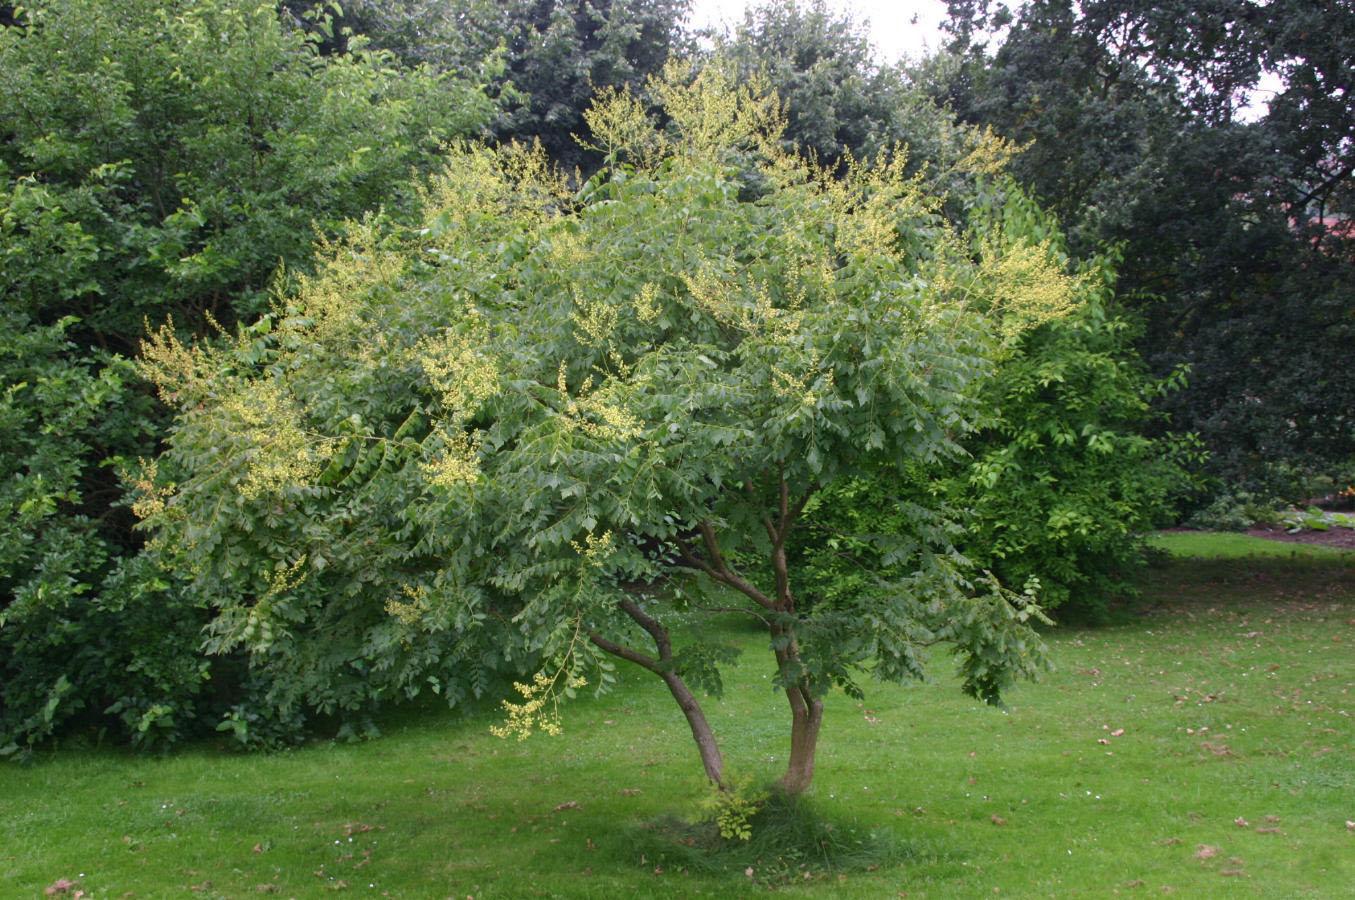 Yellow flowers and green leaves, yellow stems, brown branches and trunk.